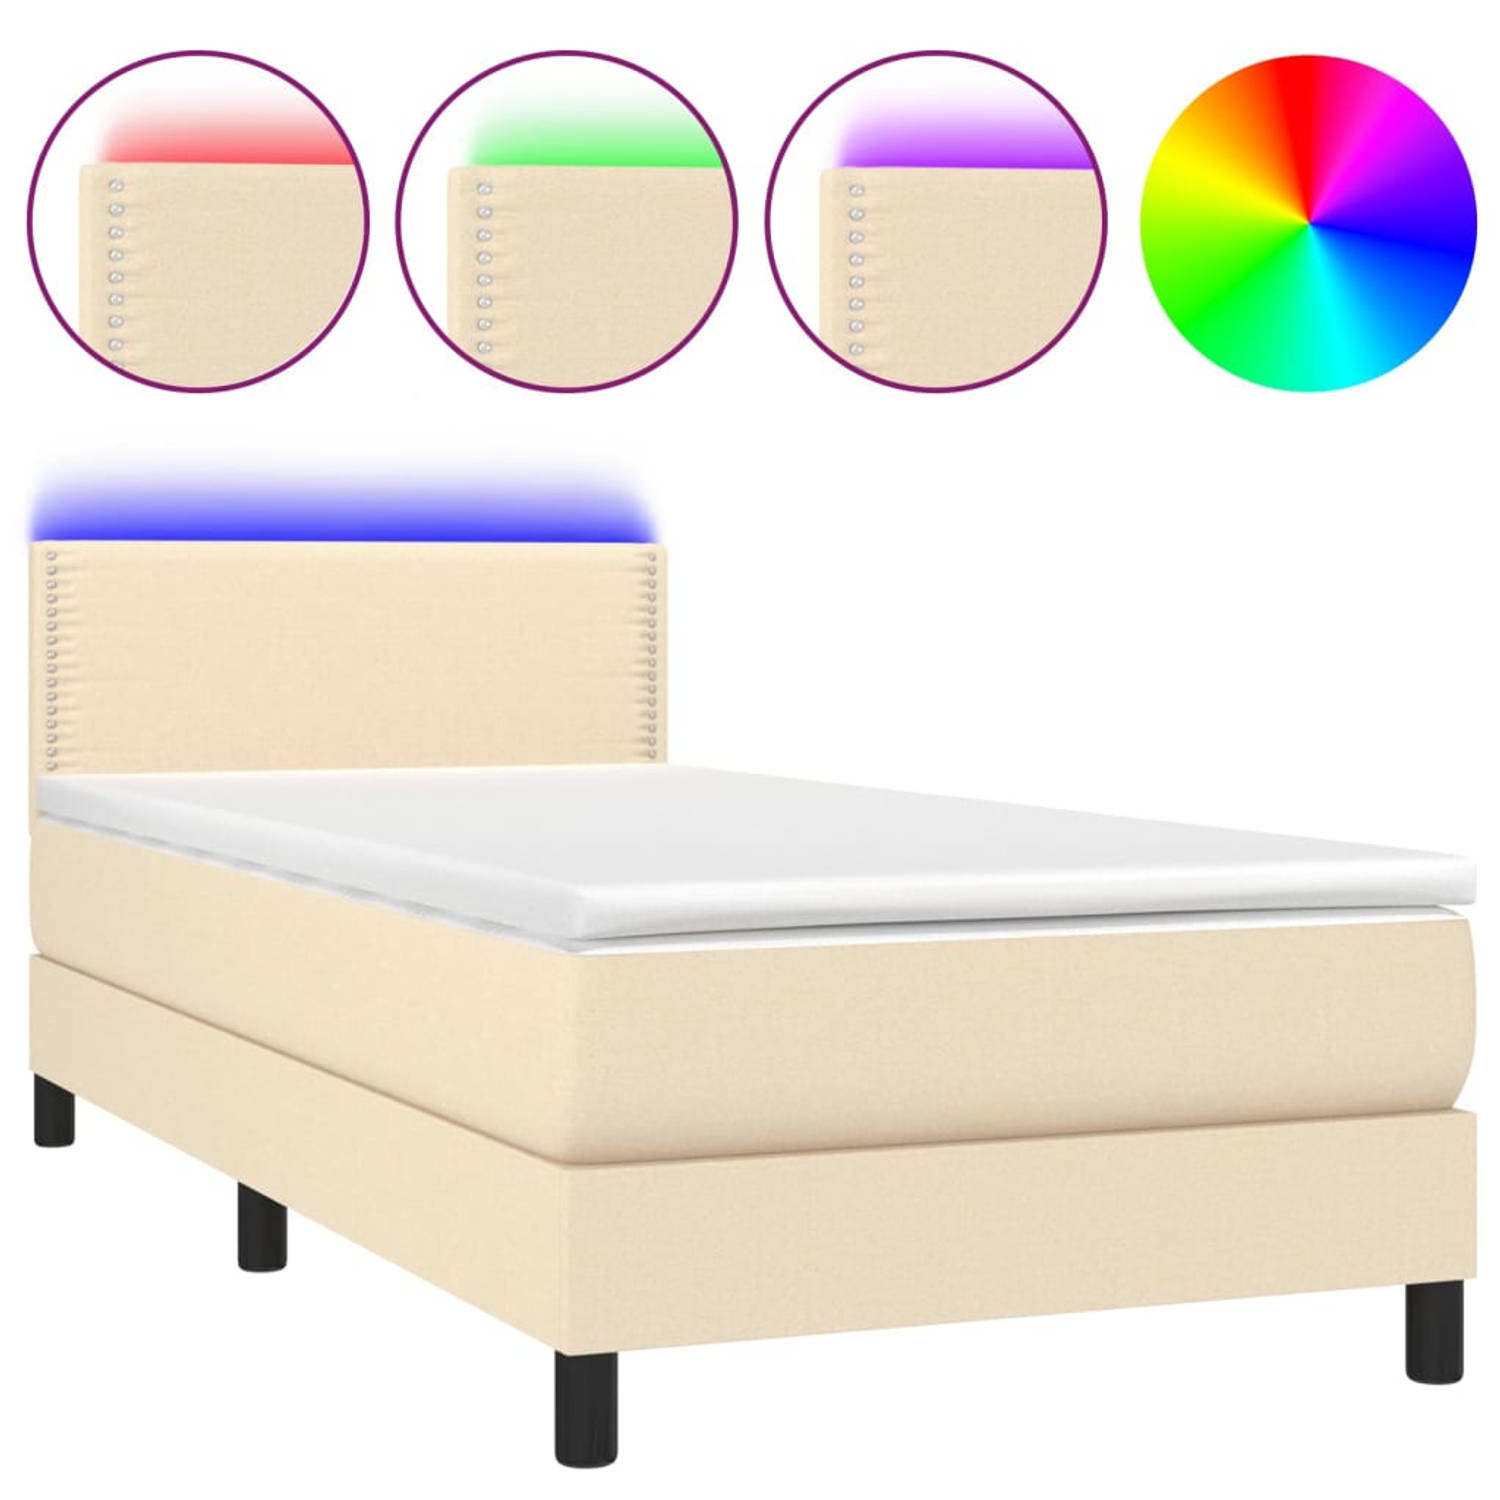 The Living Store Boxspring met matras en LED stof crèmekleurig 80x200 cm - Boxspring - Boxsprings - Bed - Slaapmeubel - Boxspringbed - Boxspring Bed - Tweepersoonsbed - Bed Met Mat